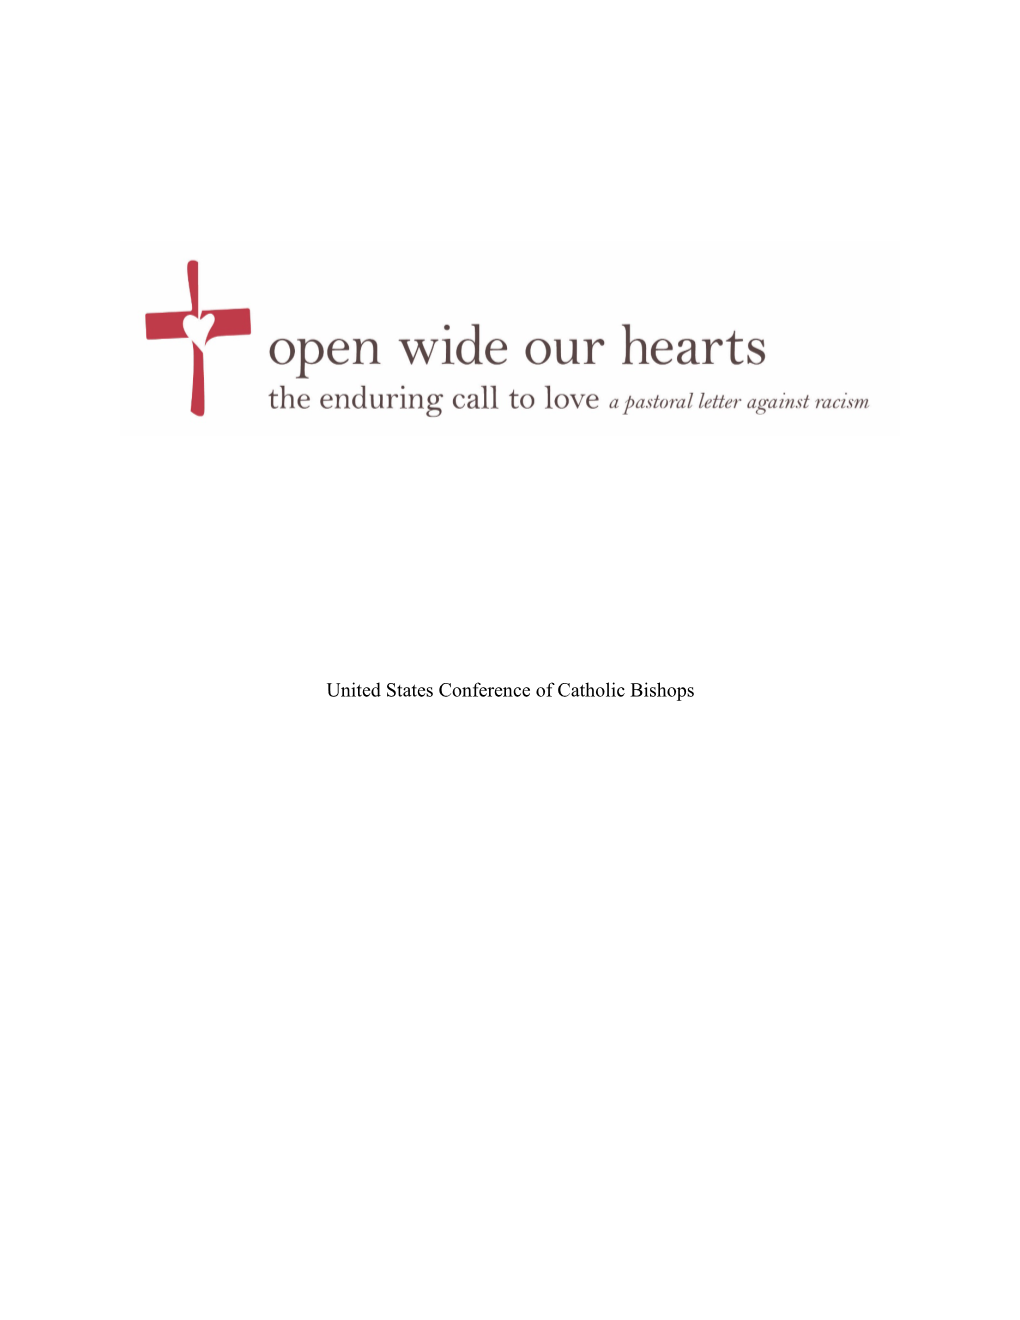 United States Conference of Catholic Bishops (USCCB), “Open Wide Our